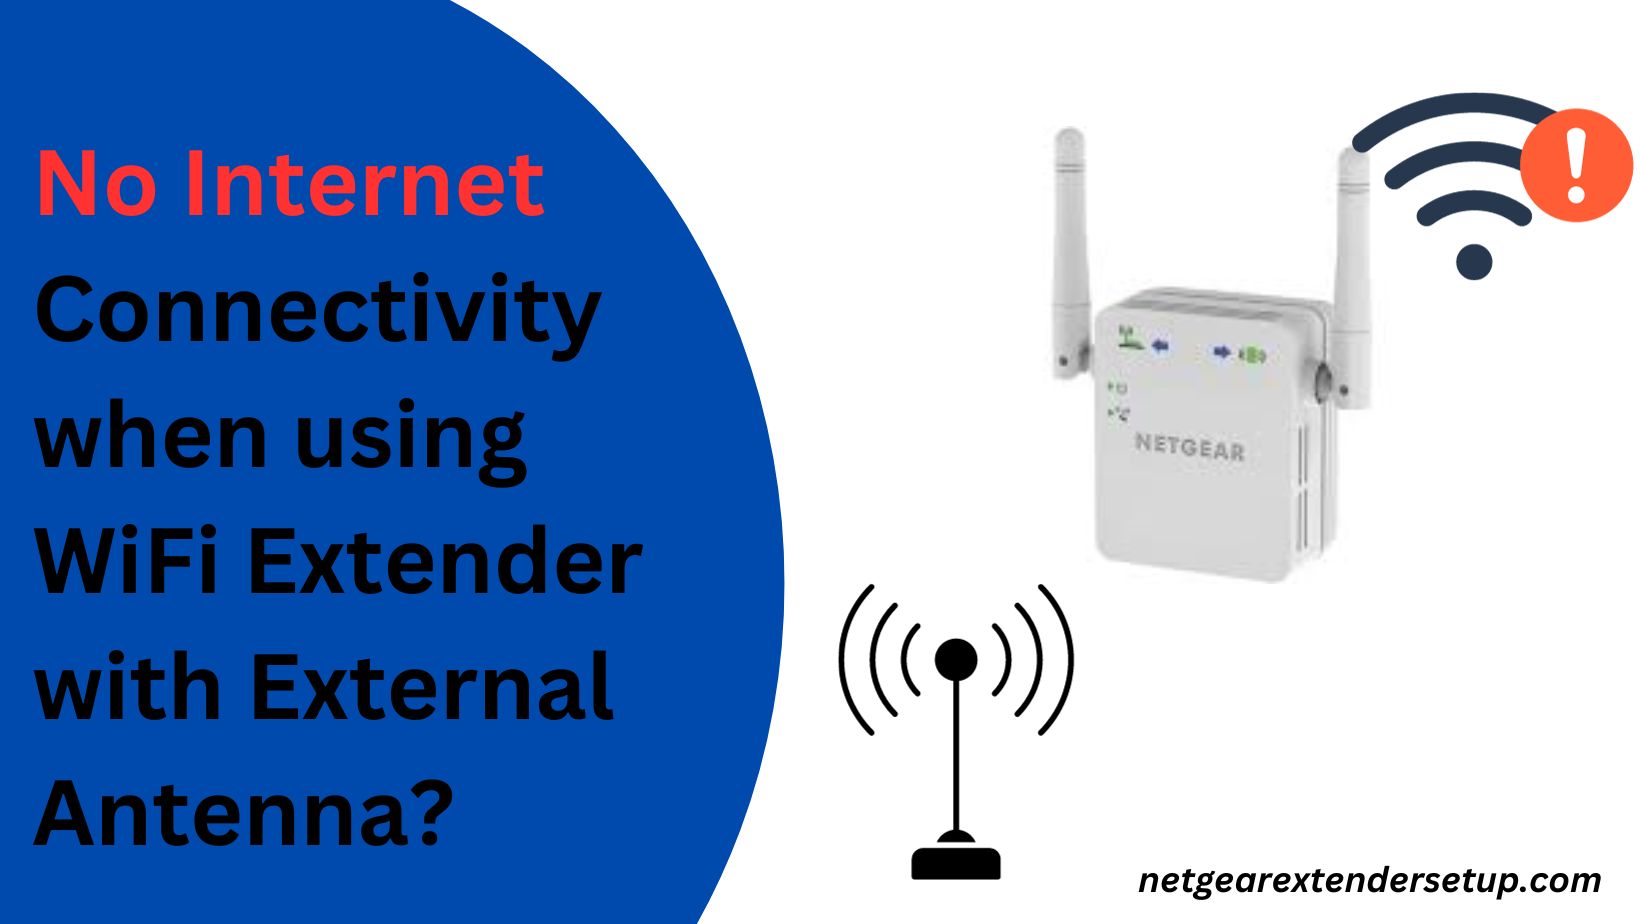 You are currently viewing Experiencing No Internet Connectivity when using WiFi Extender with External Antenna?